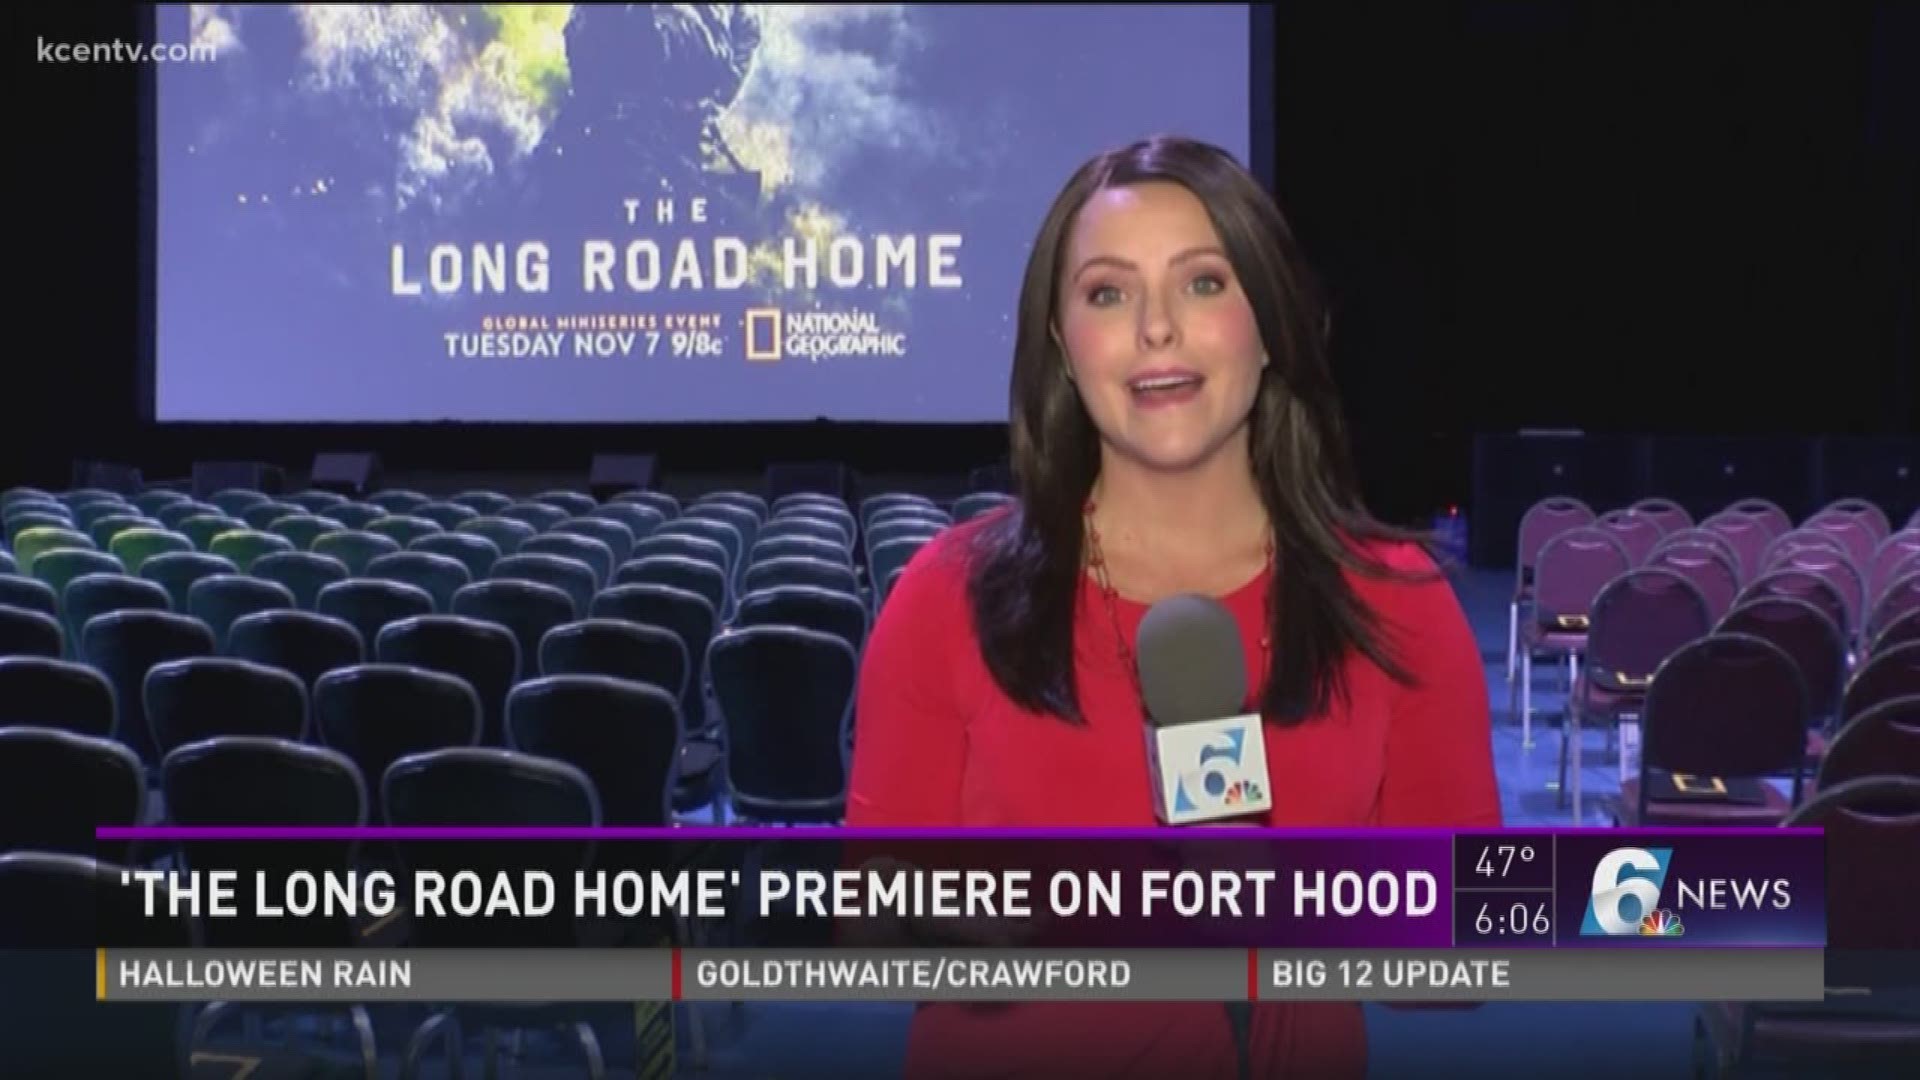 National Geographic's The Long Road Home, which filmed on Fort Hood, will host a premiere screening for soldiers and their families Oct. 27 at 6 p.m. inside the Abrams Gym.